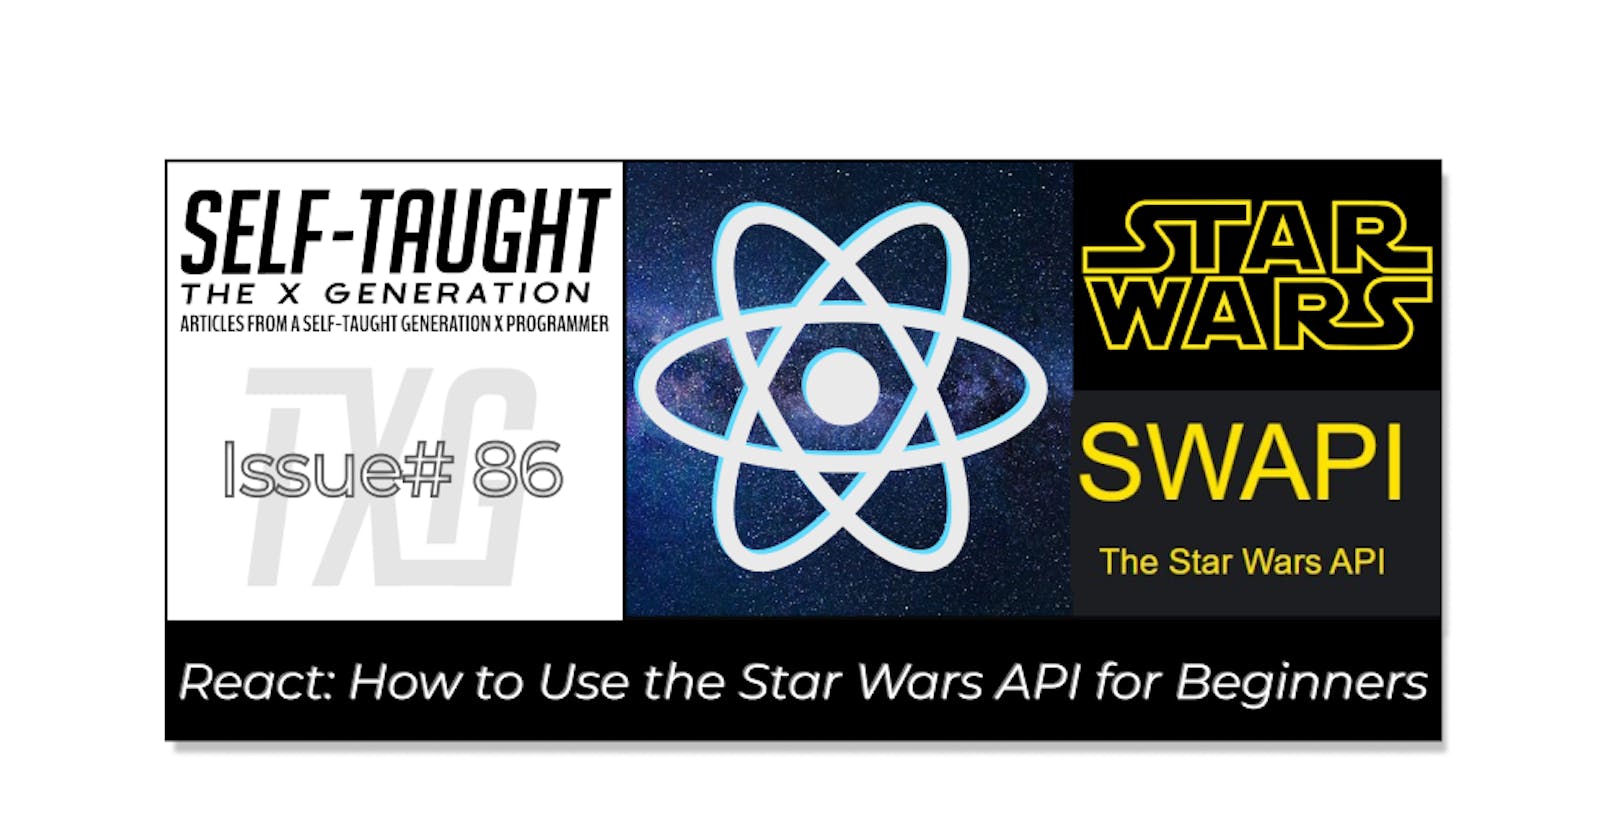 React: How to Use the Star Wars API for Beginners